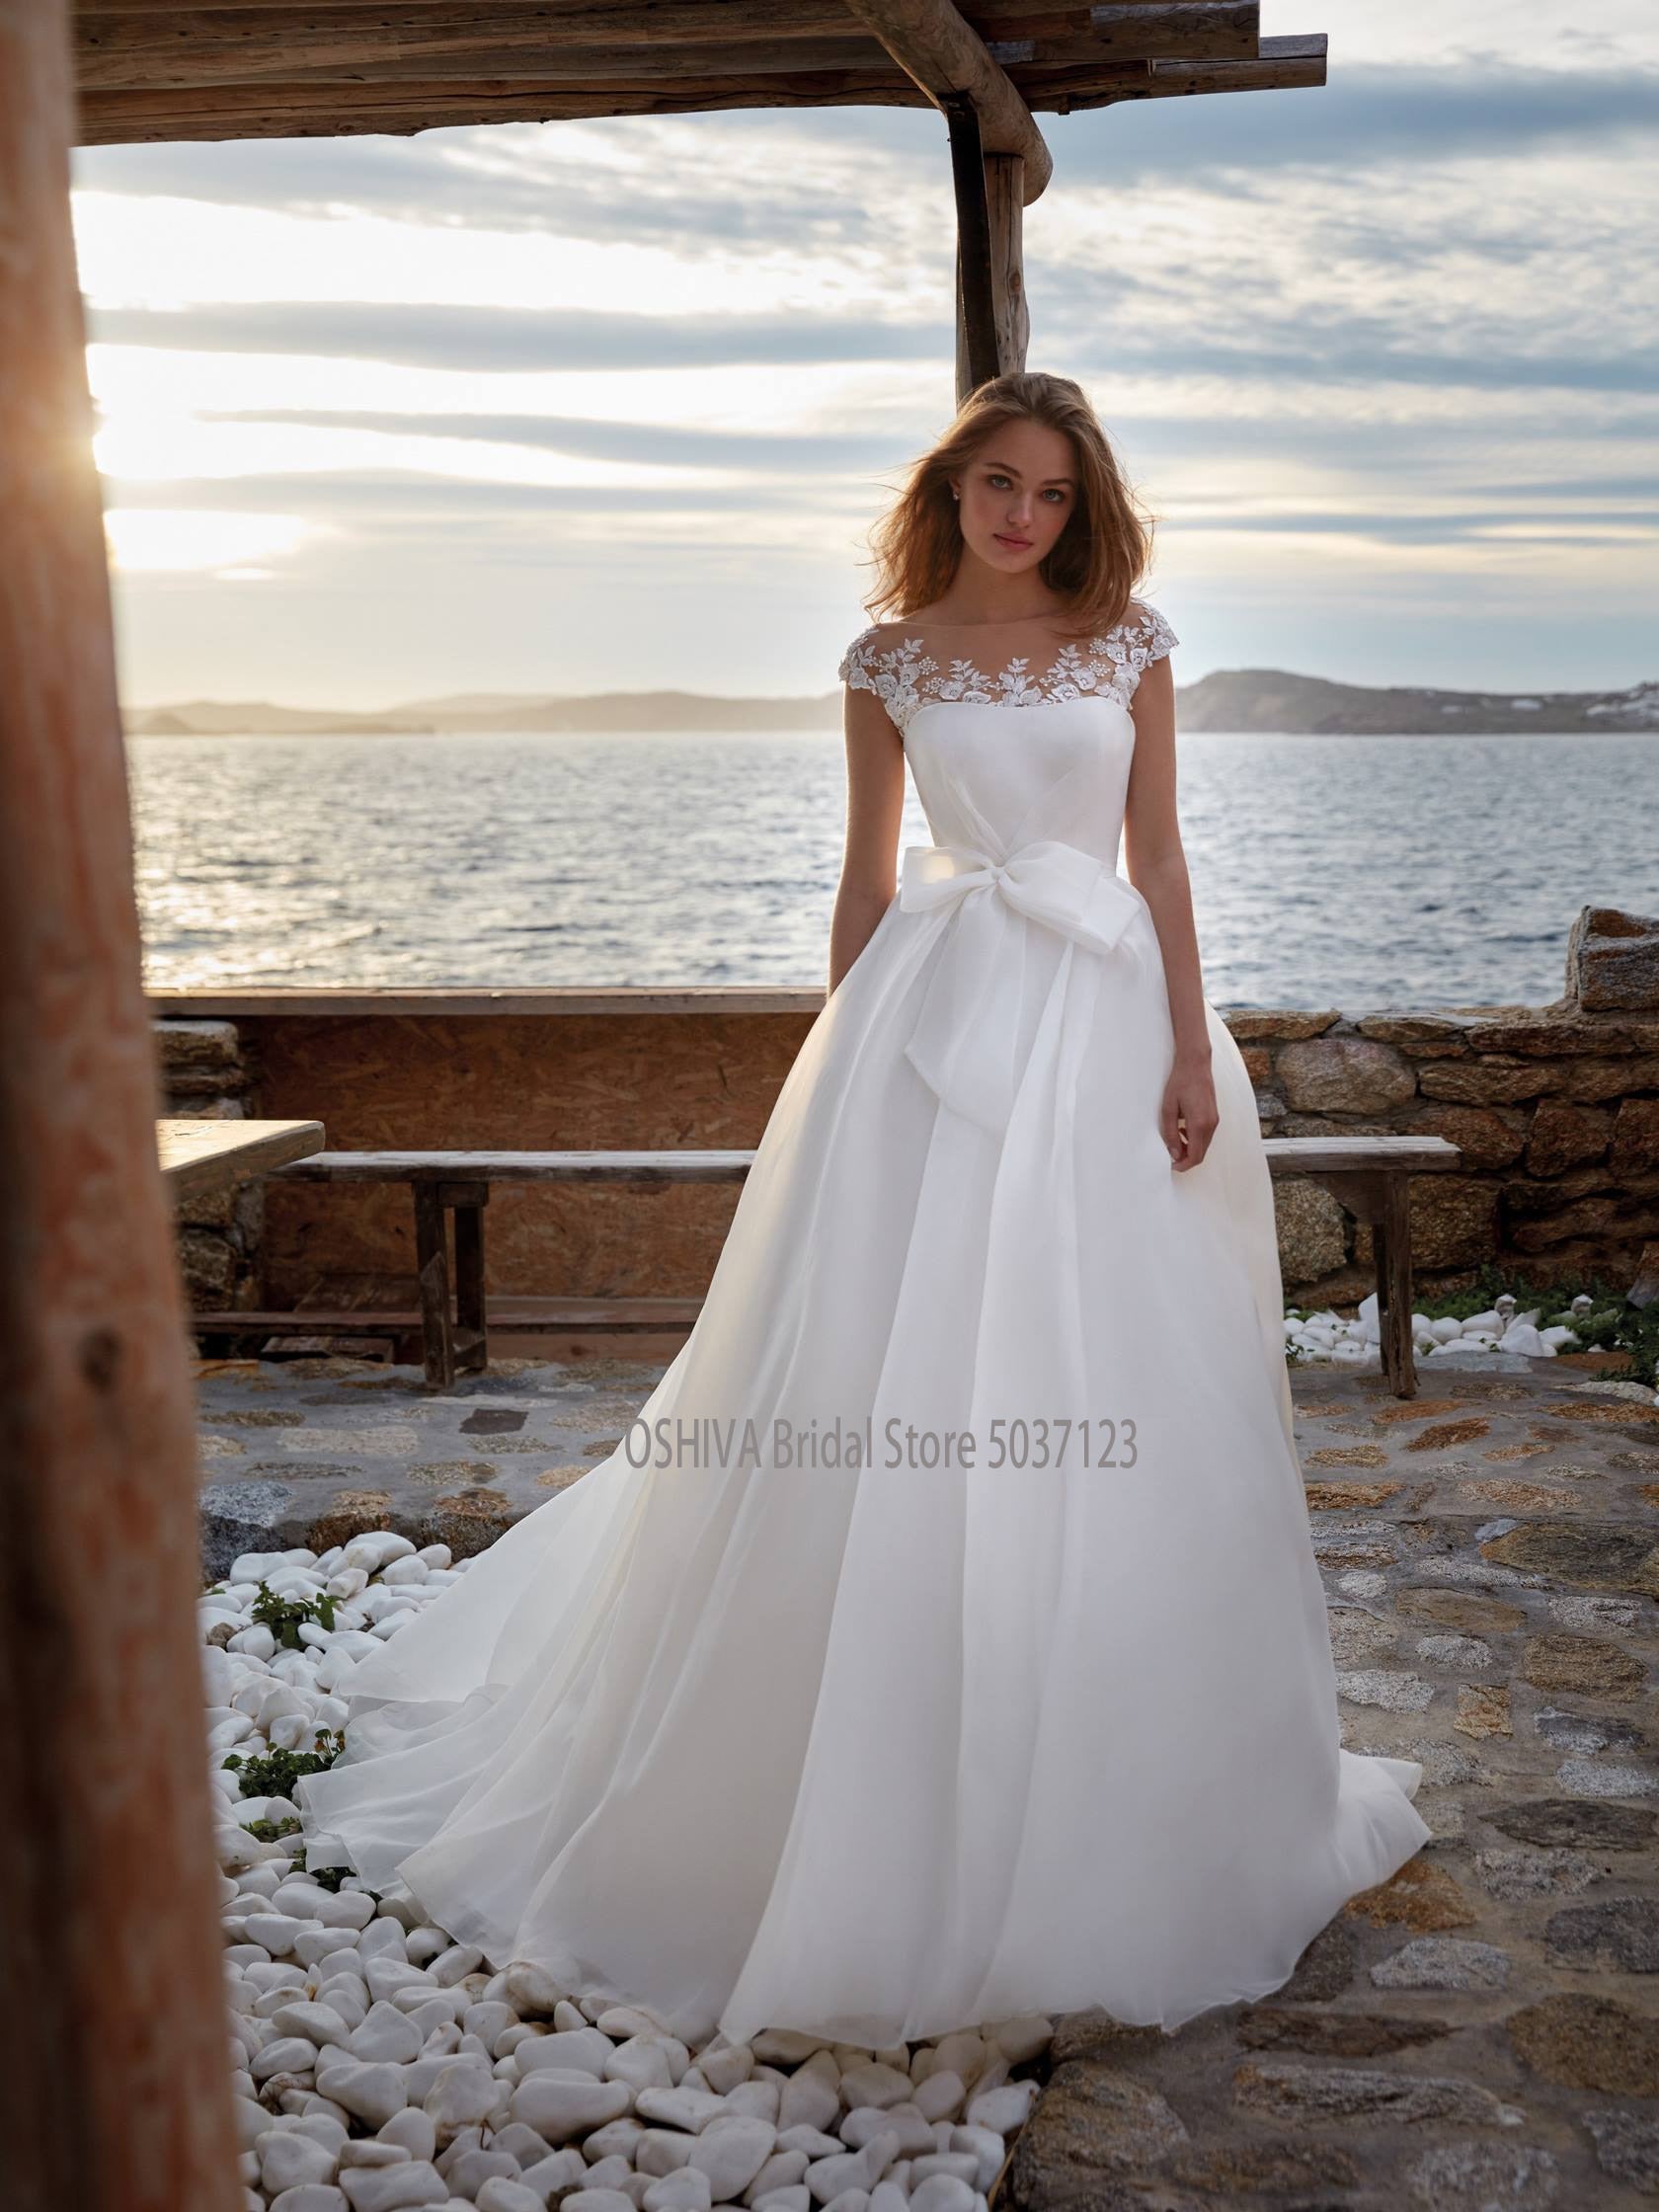 Charming Organza Beach Wedding Dresses with Detachable Neckline Strapless A Line Sleeveless Sweep Train Bridal Gown with Bow